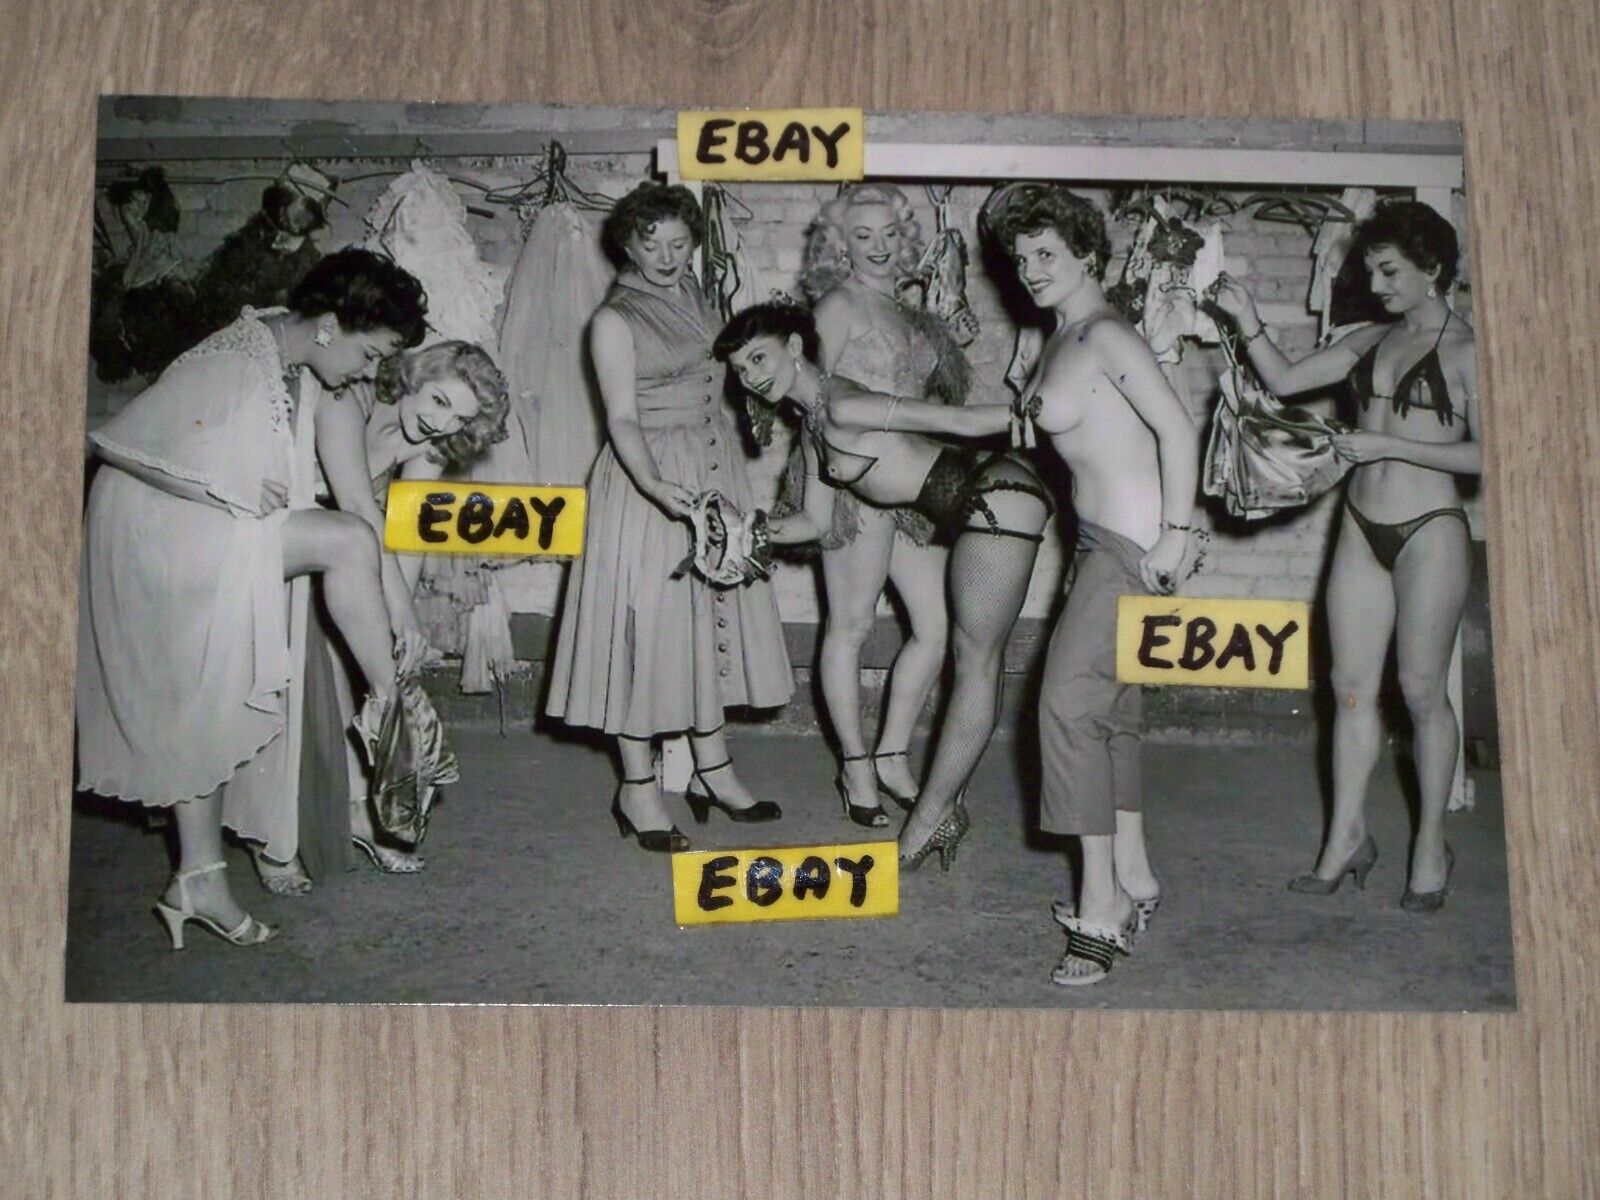 4X6 Vintage Artistic Lingerie Burlesque Photo Patti Waggin Backstage Before Show